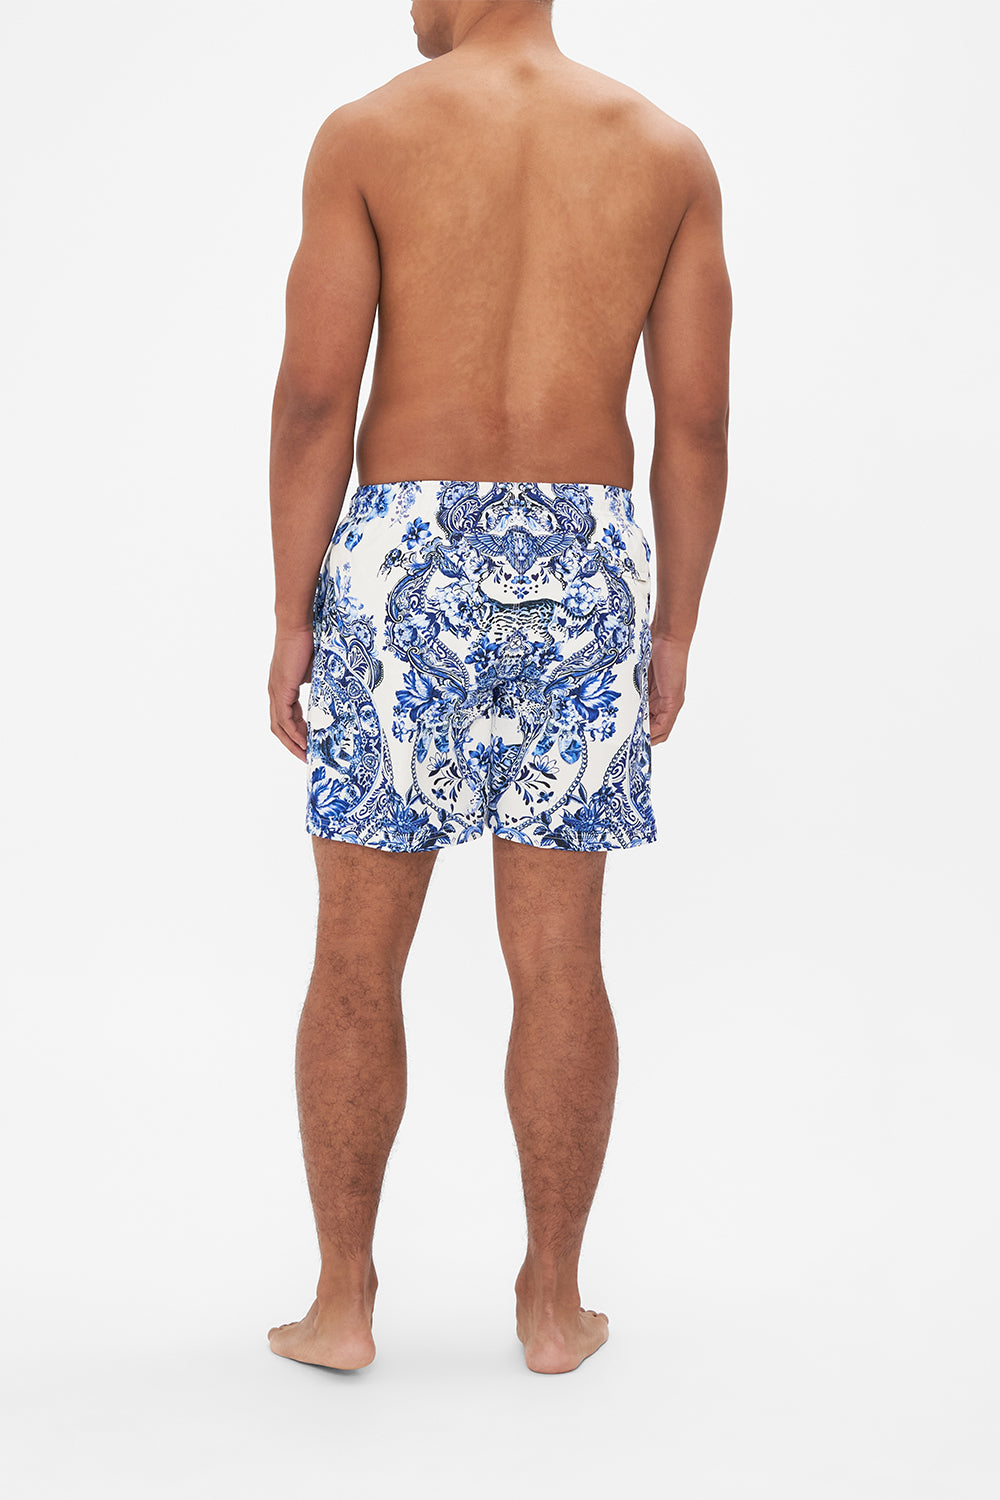 Back view of model wearing Hotel Franks By CAMILLA blue and white mens boardshorts in Glaze and Graze print